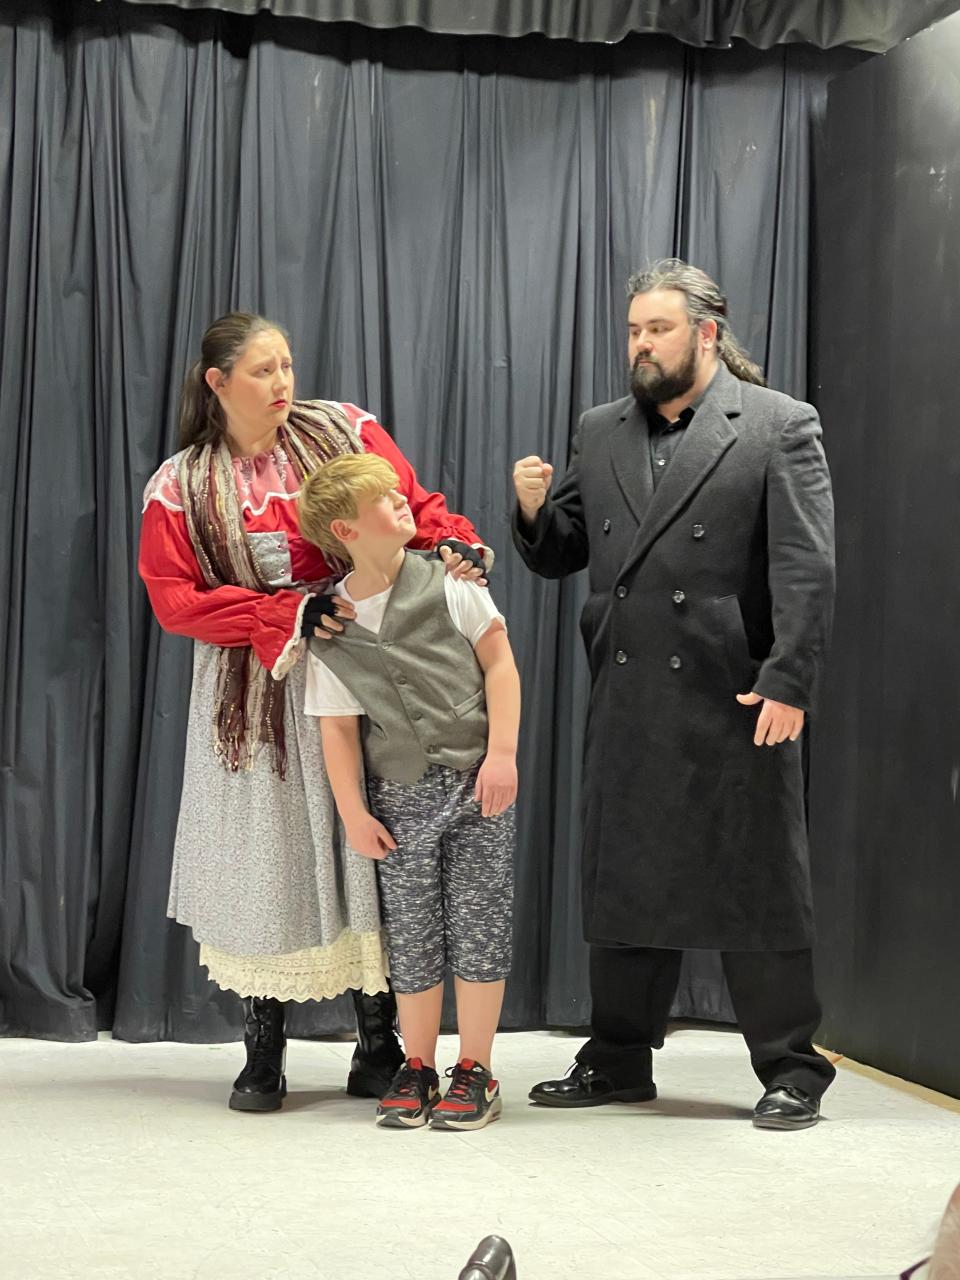 Adrianna LeDonne, left, as Nancy, Eli Gowan, as Oliver, and Alexander Bonner, as Bill Sikes, rehearse a scene for Footlight Players' production of "Oliver!" that opens March 3 and continues through March 19, 2023, at the theater in Michigan City.